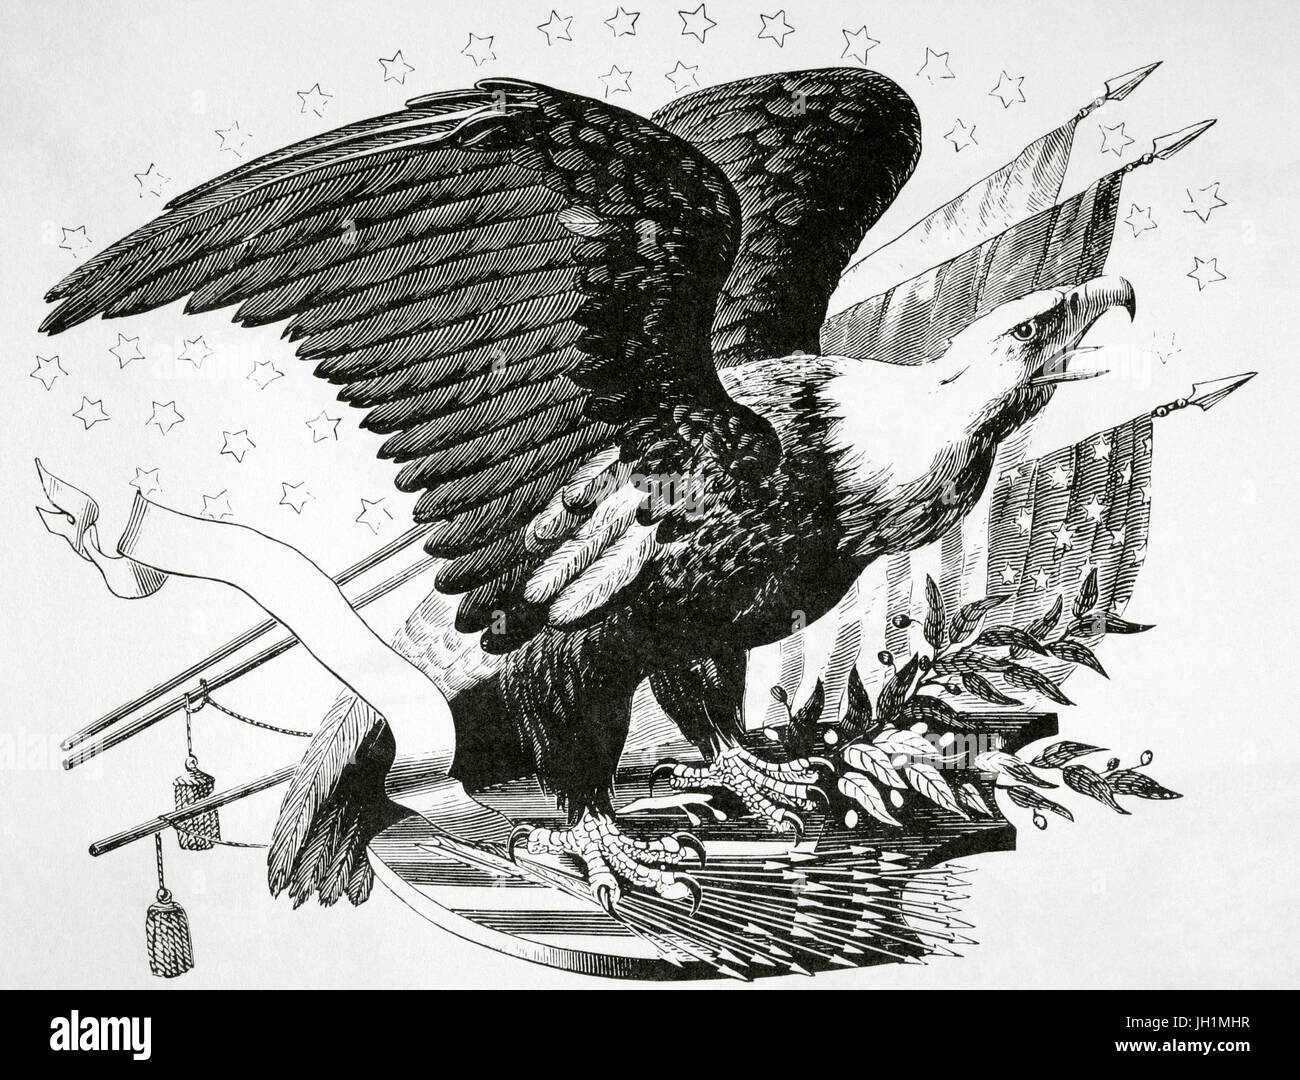 Bald eagle and other patriotic symbols of the American Revolutionary War (1775-1783). Engraving in The American Revolution, 19th century. Stock Photo